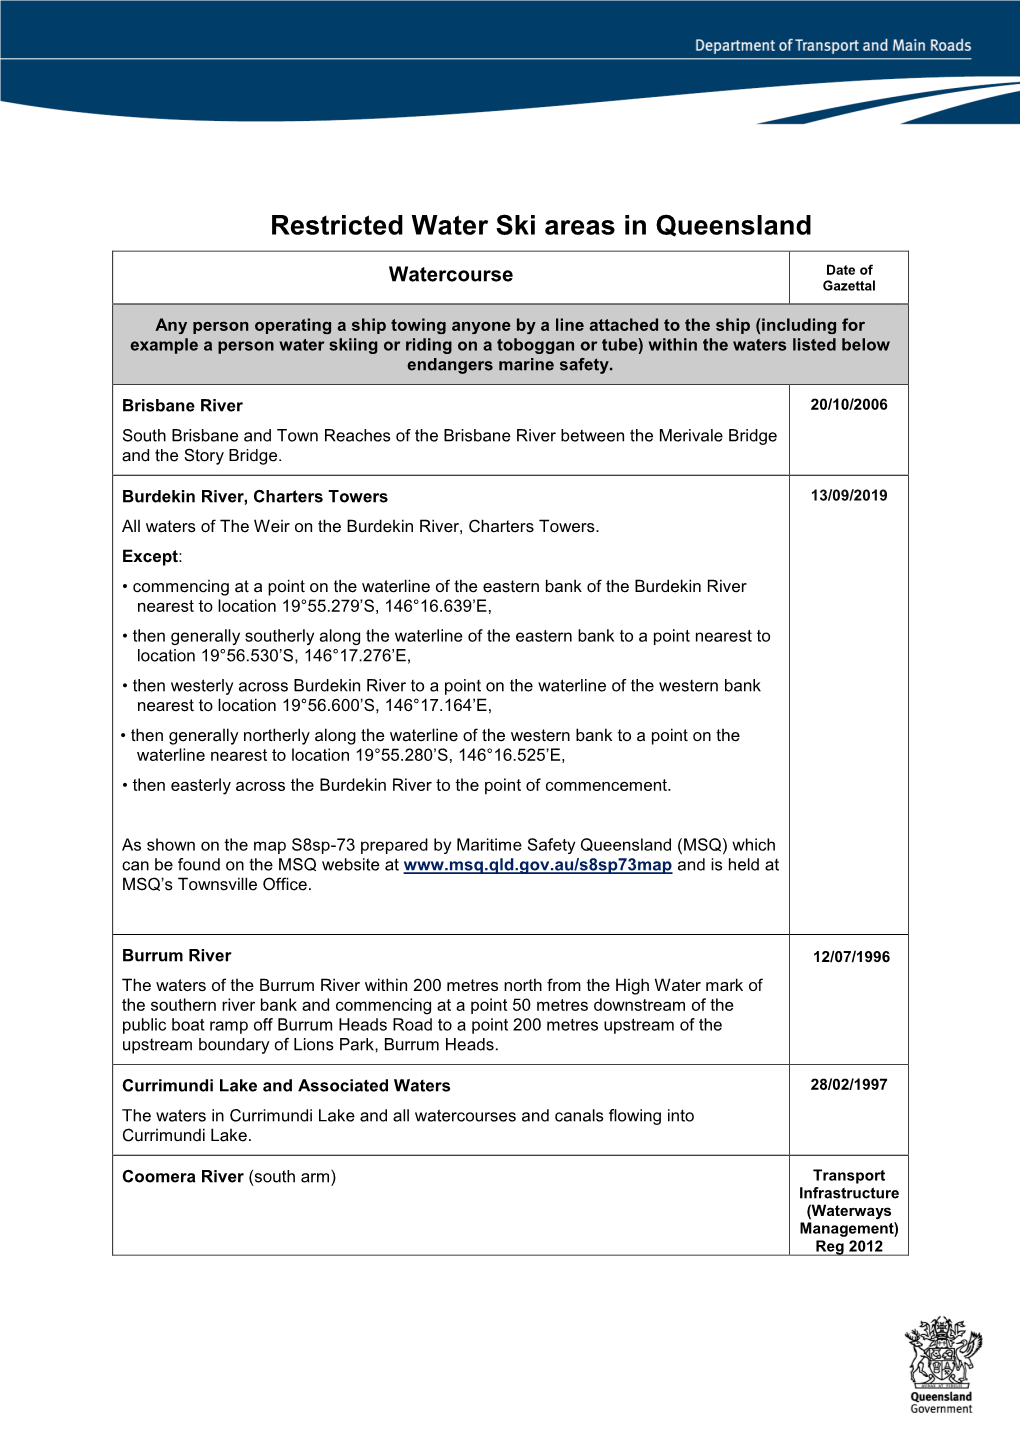 Restricted Water Ski Areas in Queensland